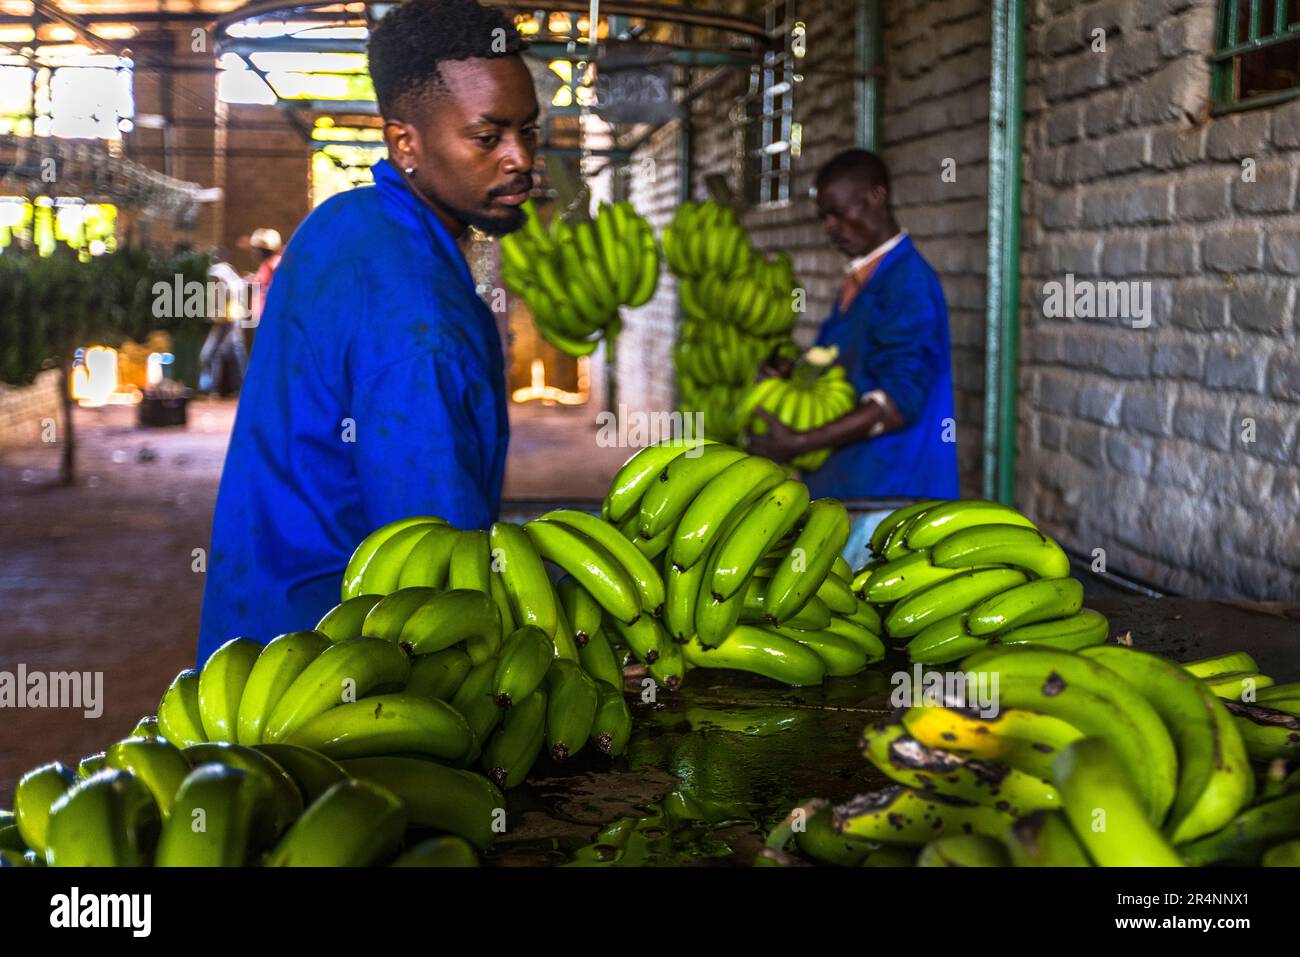 Workers in the Nature's Gift Bananas warehouse. The bananas are immersed in a chlorine bath to protect them from pests. Banana plantation at Kumbali Country Lodge in Lilongwe, Malawi Stock Photo